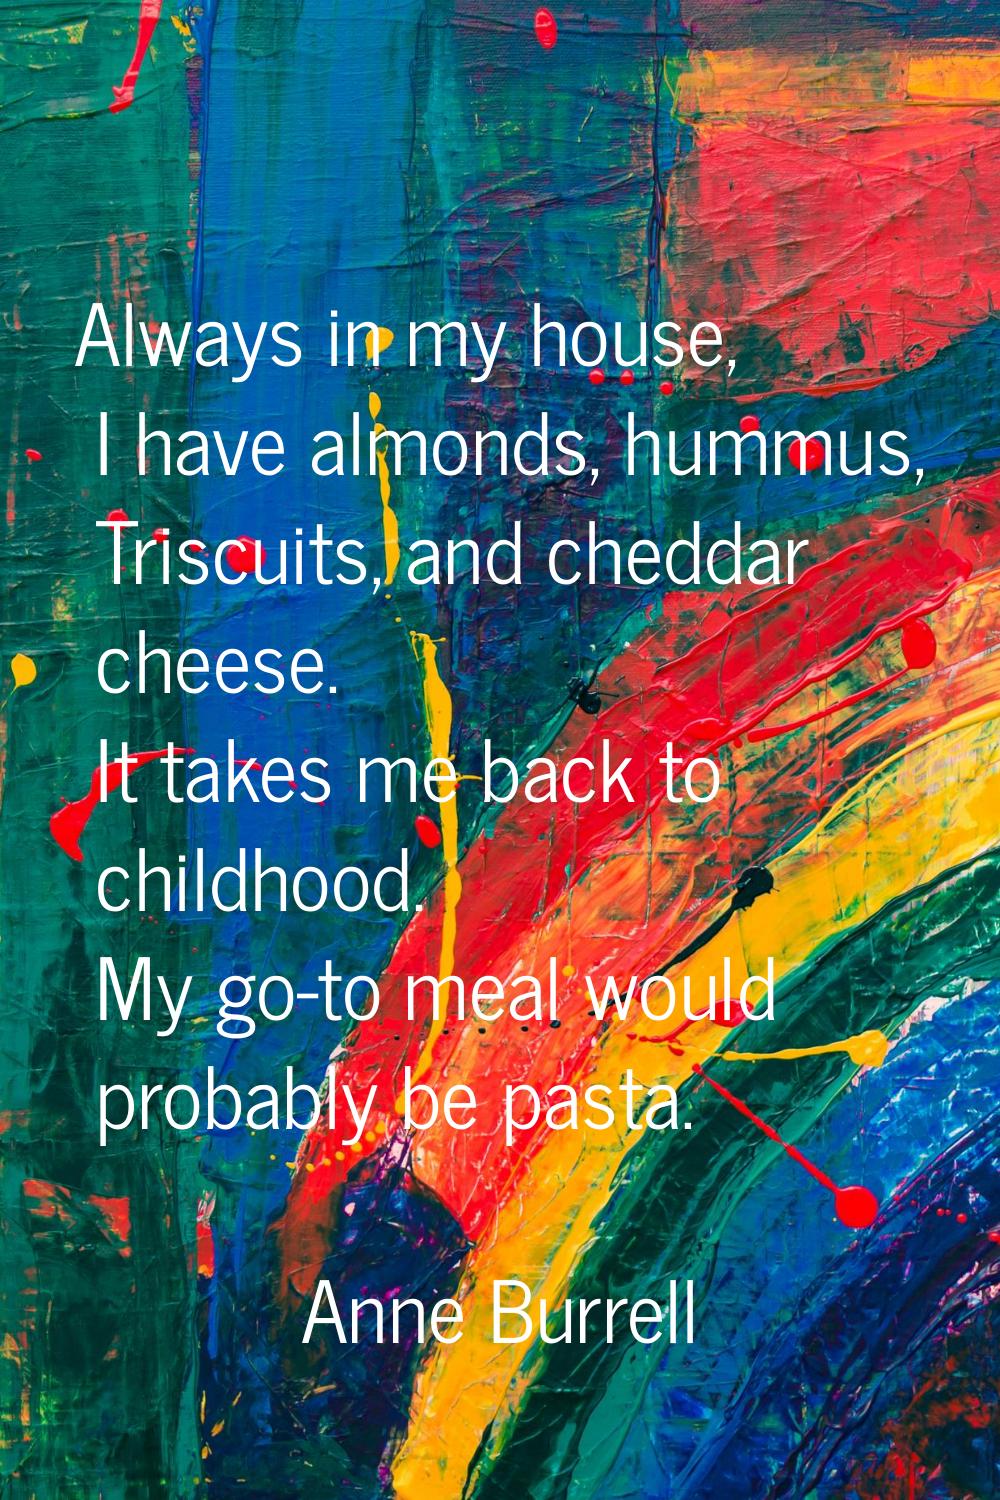 Always in my house, I have almonds, hummus, Triscuits, and cheddar cheese. It takes me back to chil